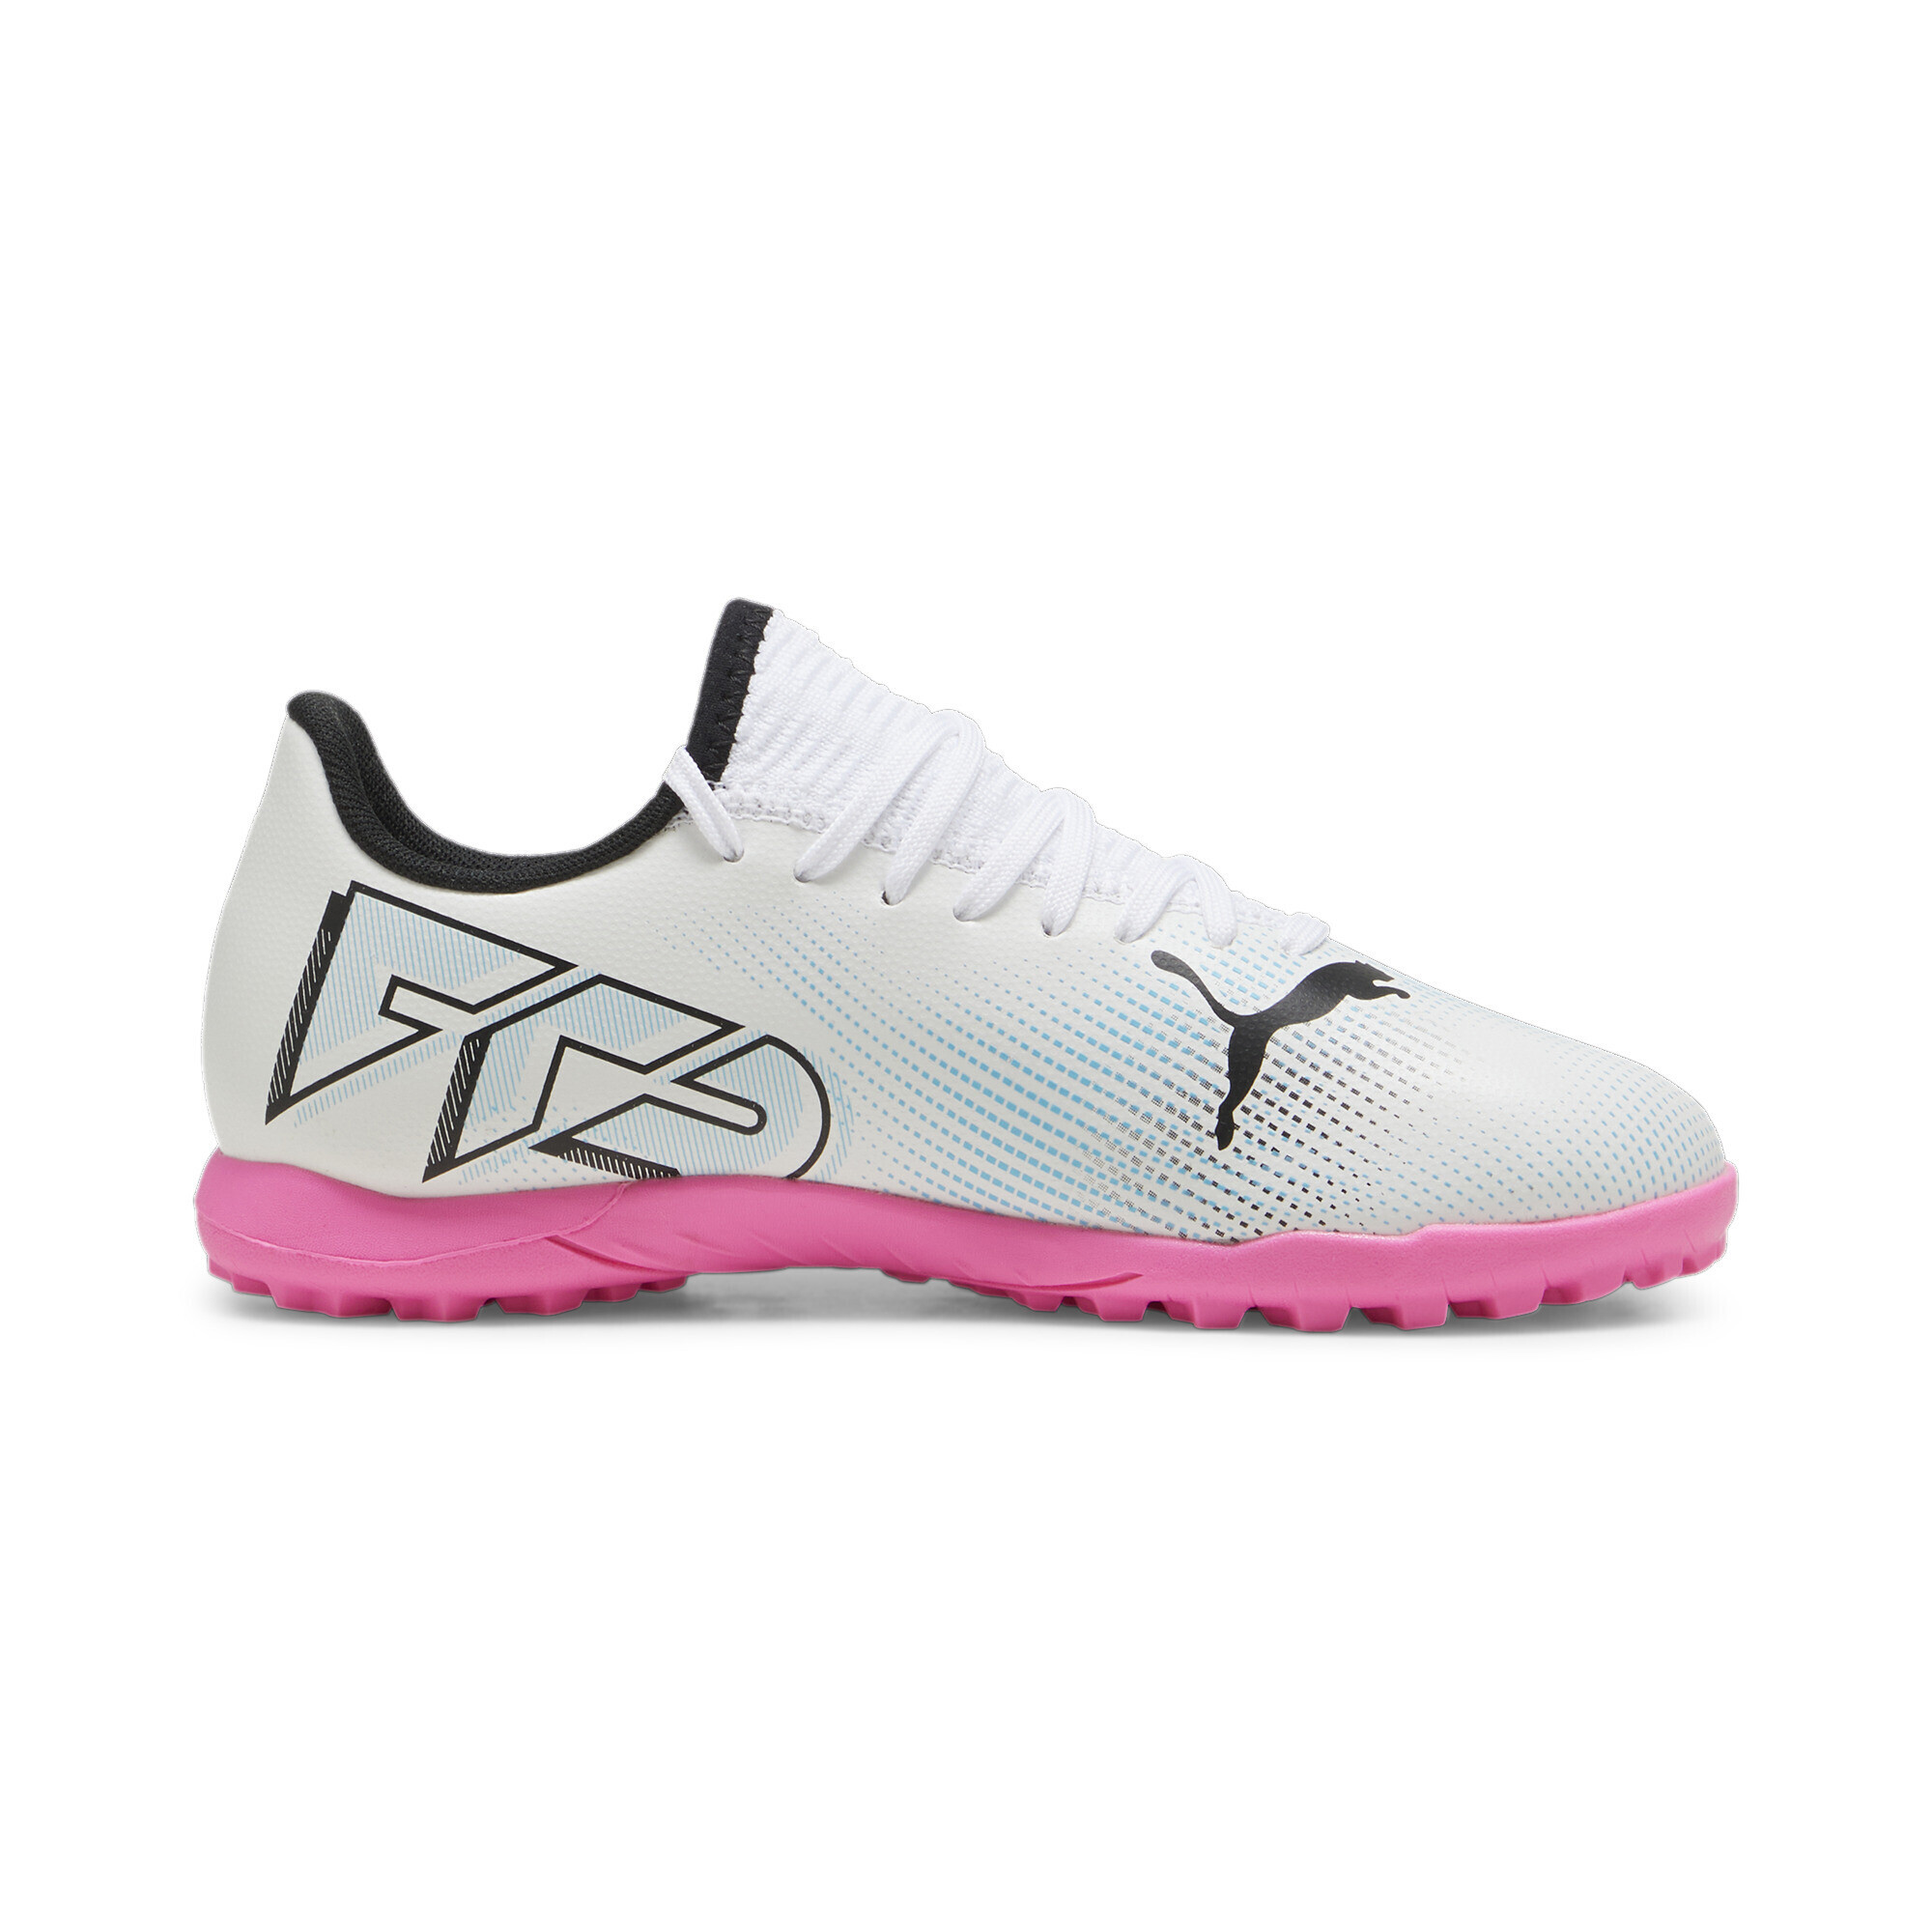 PUMA FUTURE 7 PLAY TT Youth Football Boots In White/Pink, Size EU 37